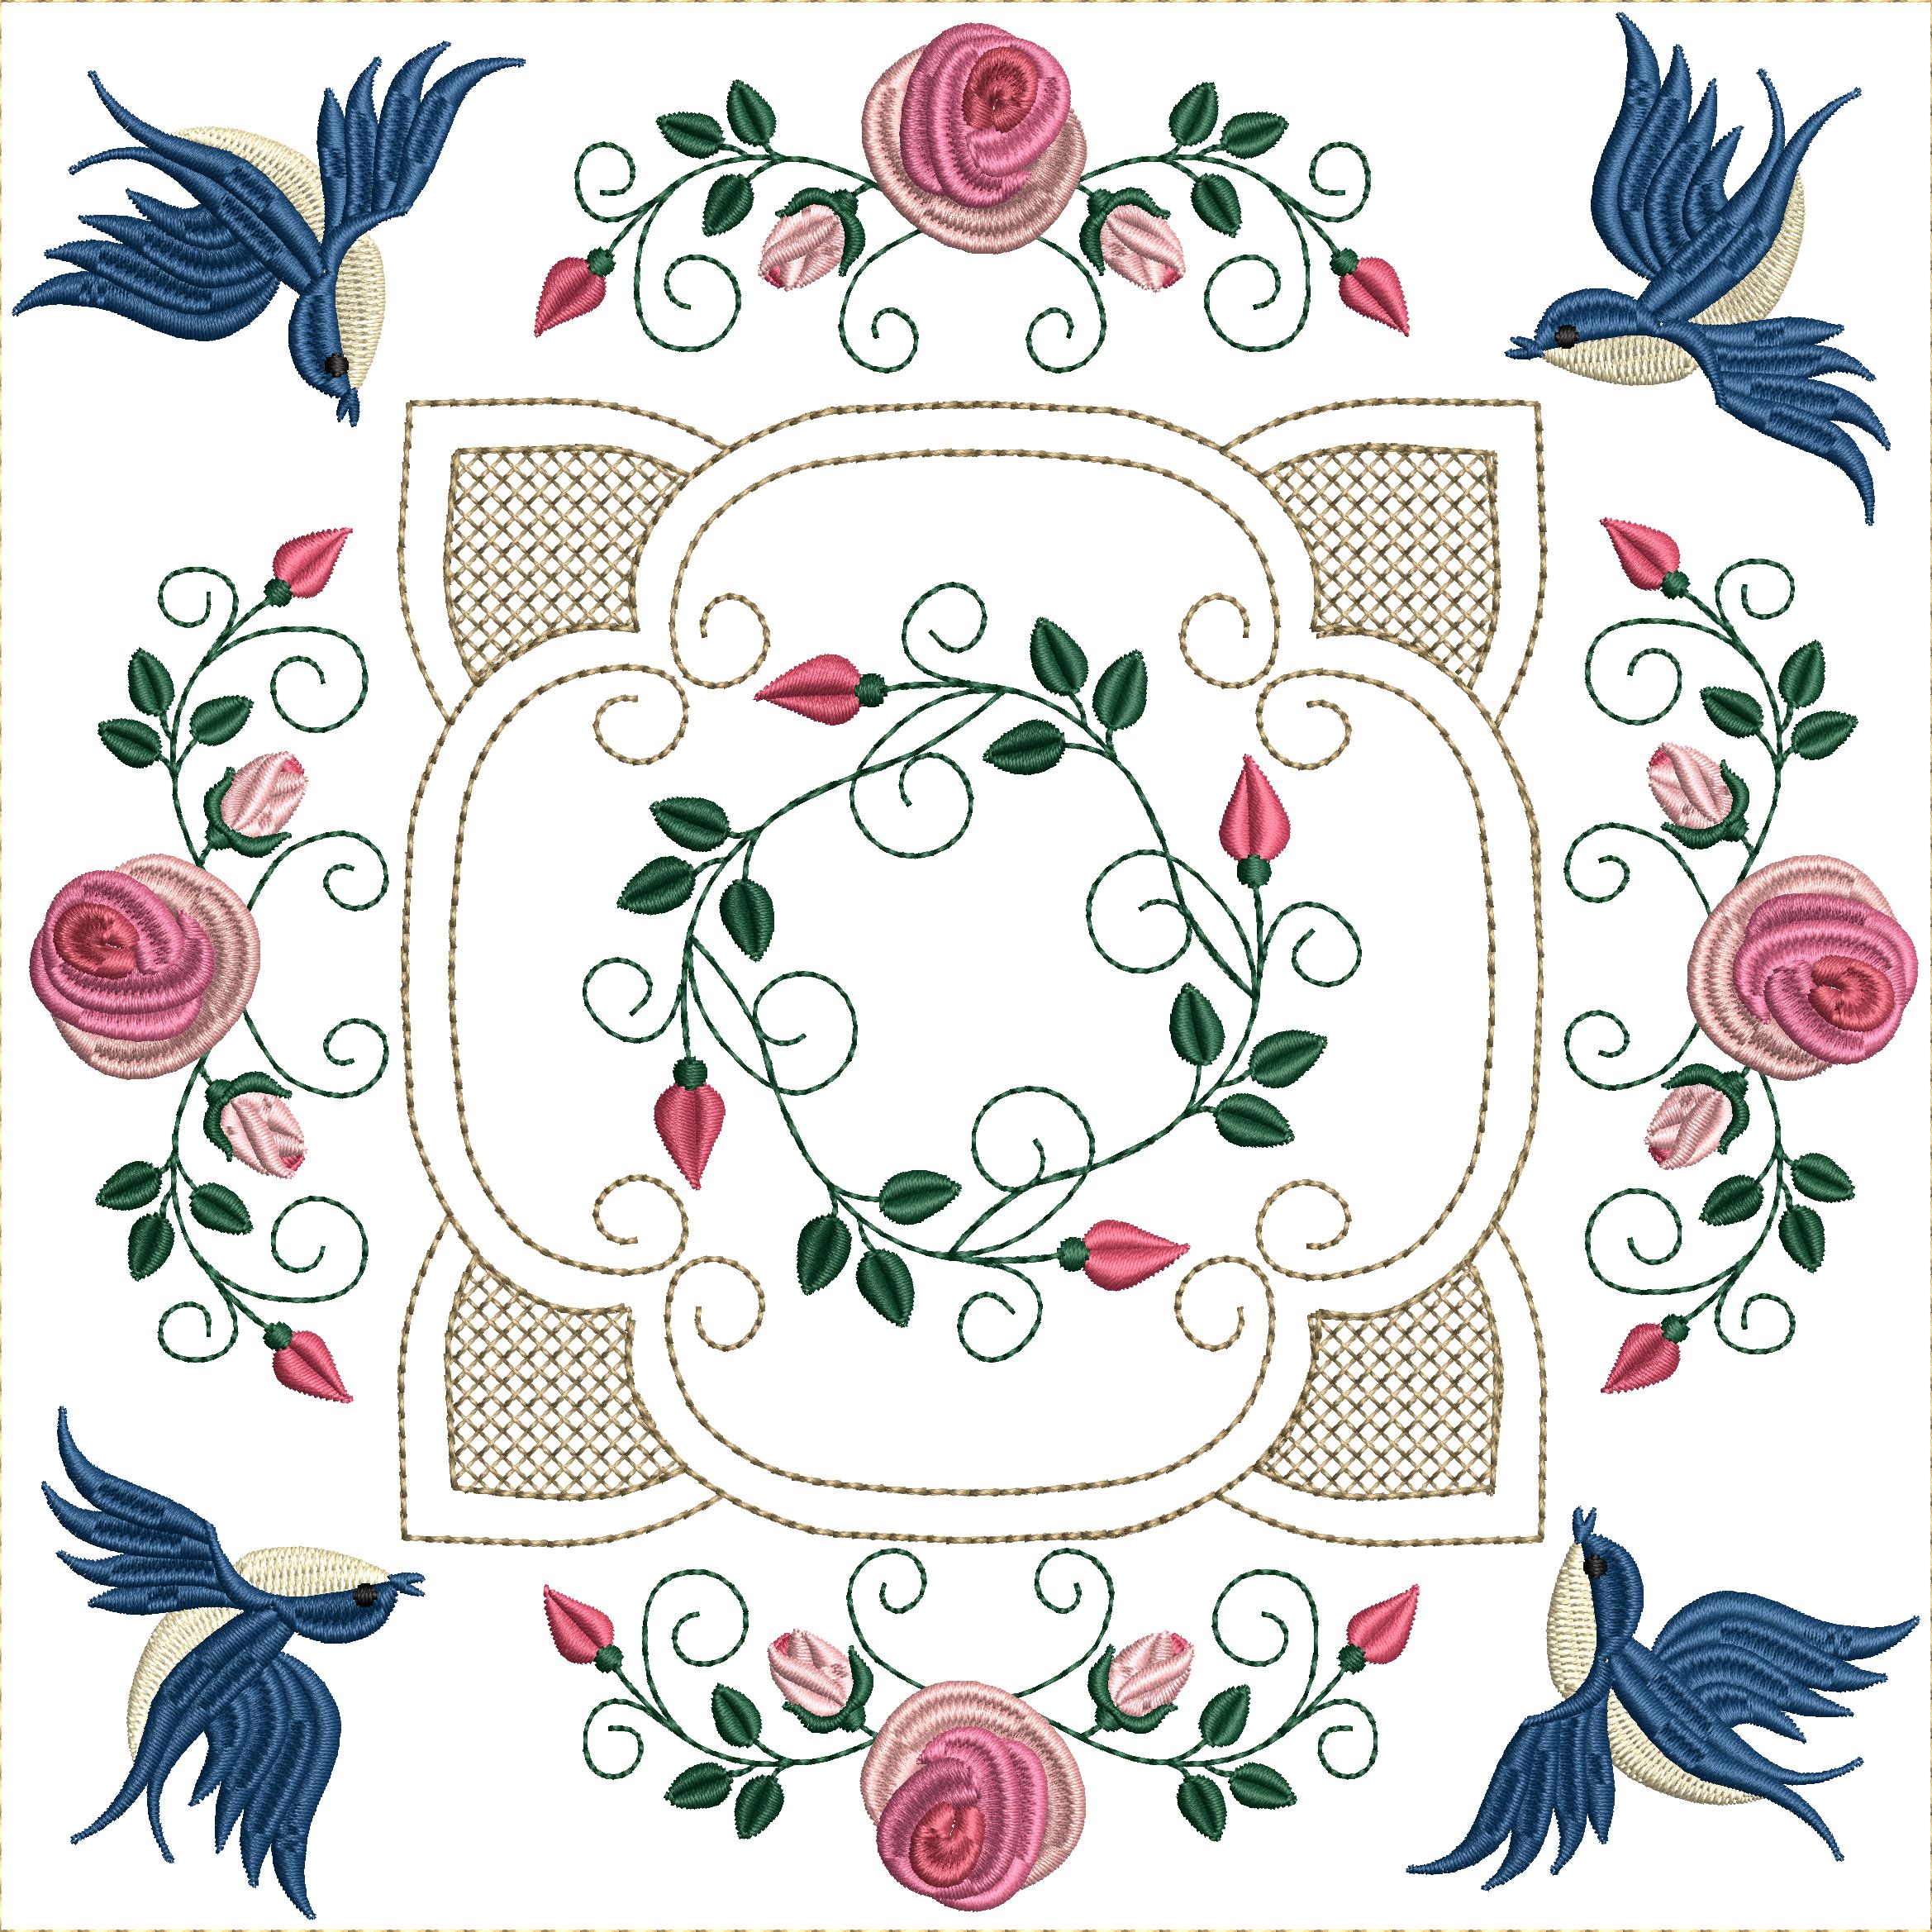 Bluebirds and Roses Quilt Blocks 8x8-13